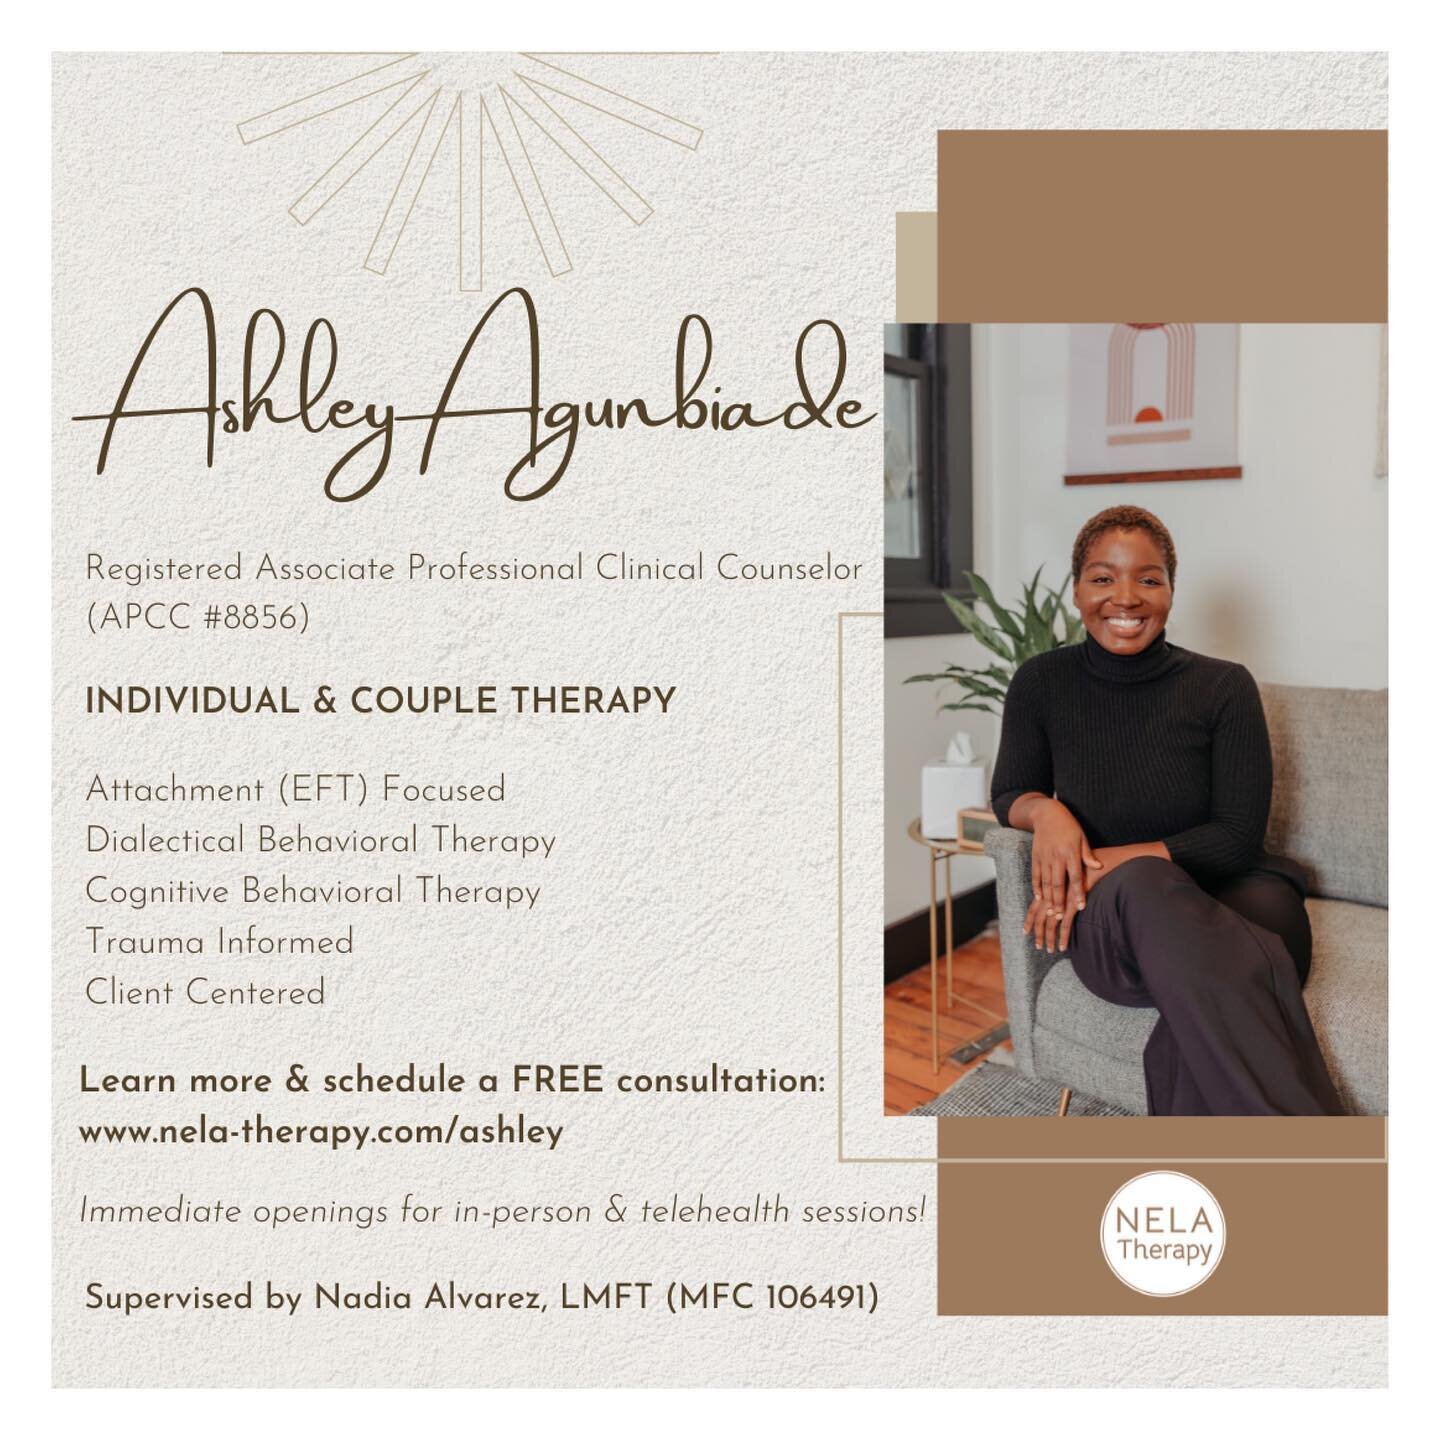 I am currently accepting clients and have immediate availability for online and in-person therapy. @ashley_nelatherapy 
.
The solutions to the challenges we face are within each of us, we may just need some assistance in finding them. My goal is to e